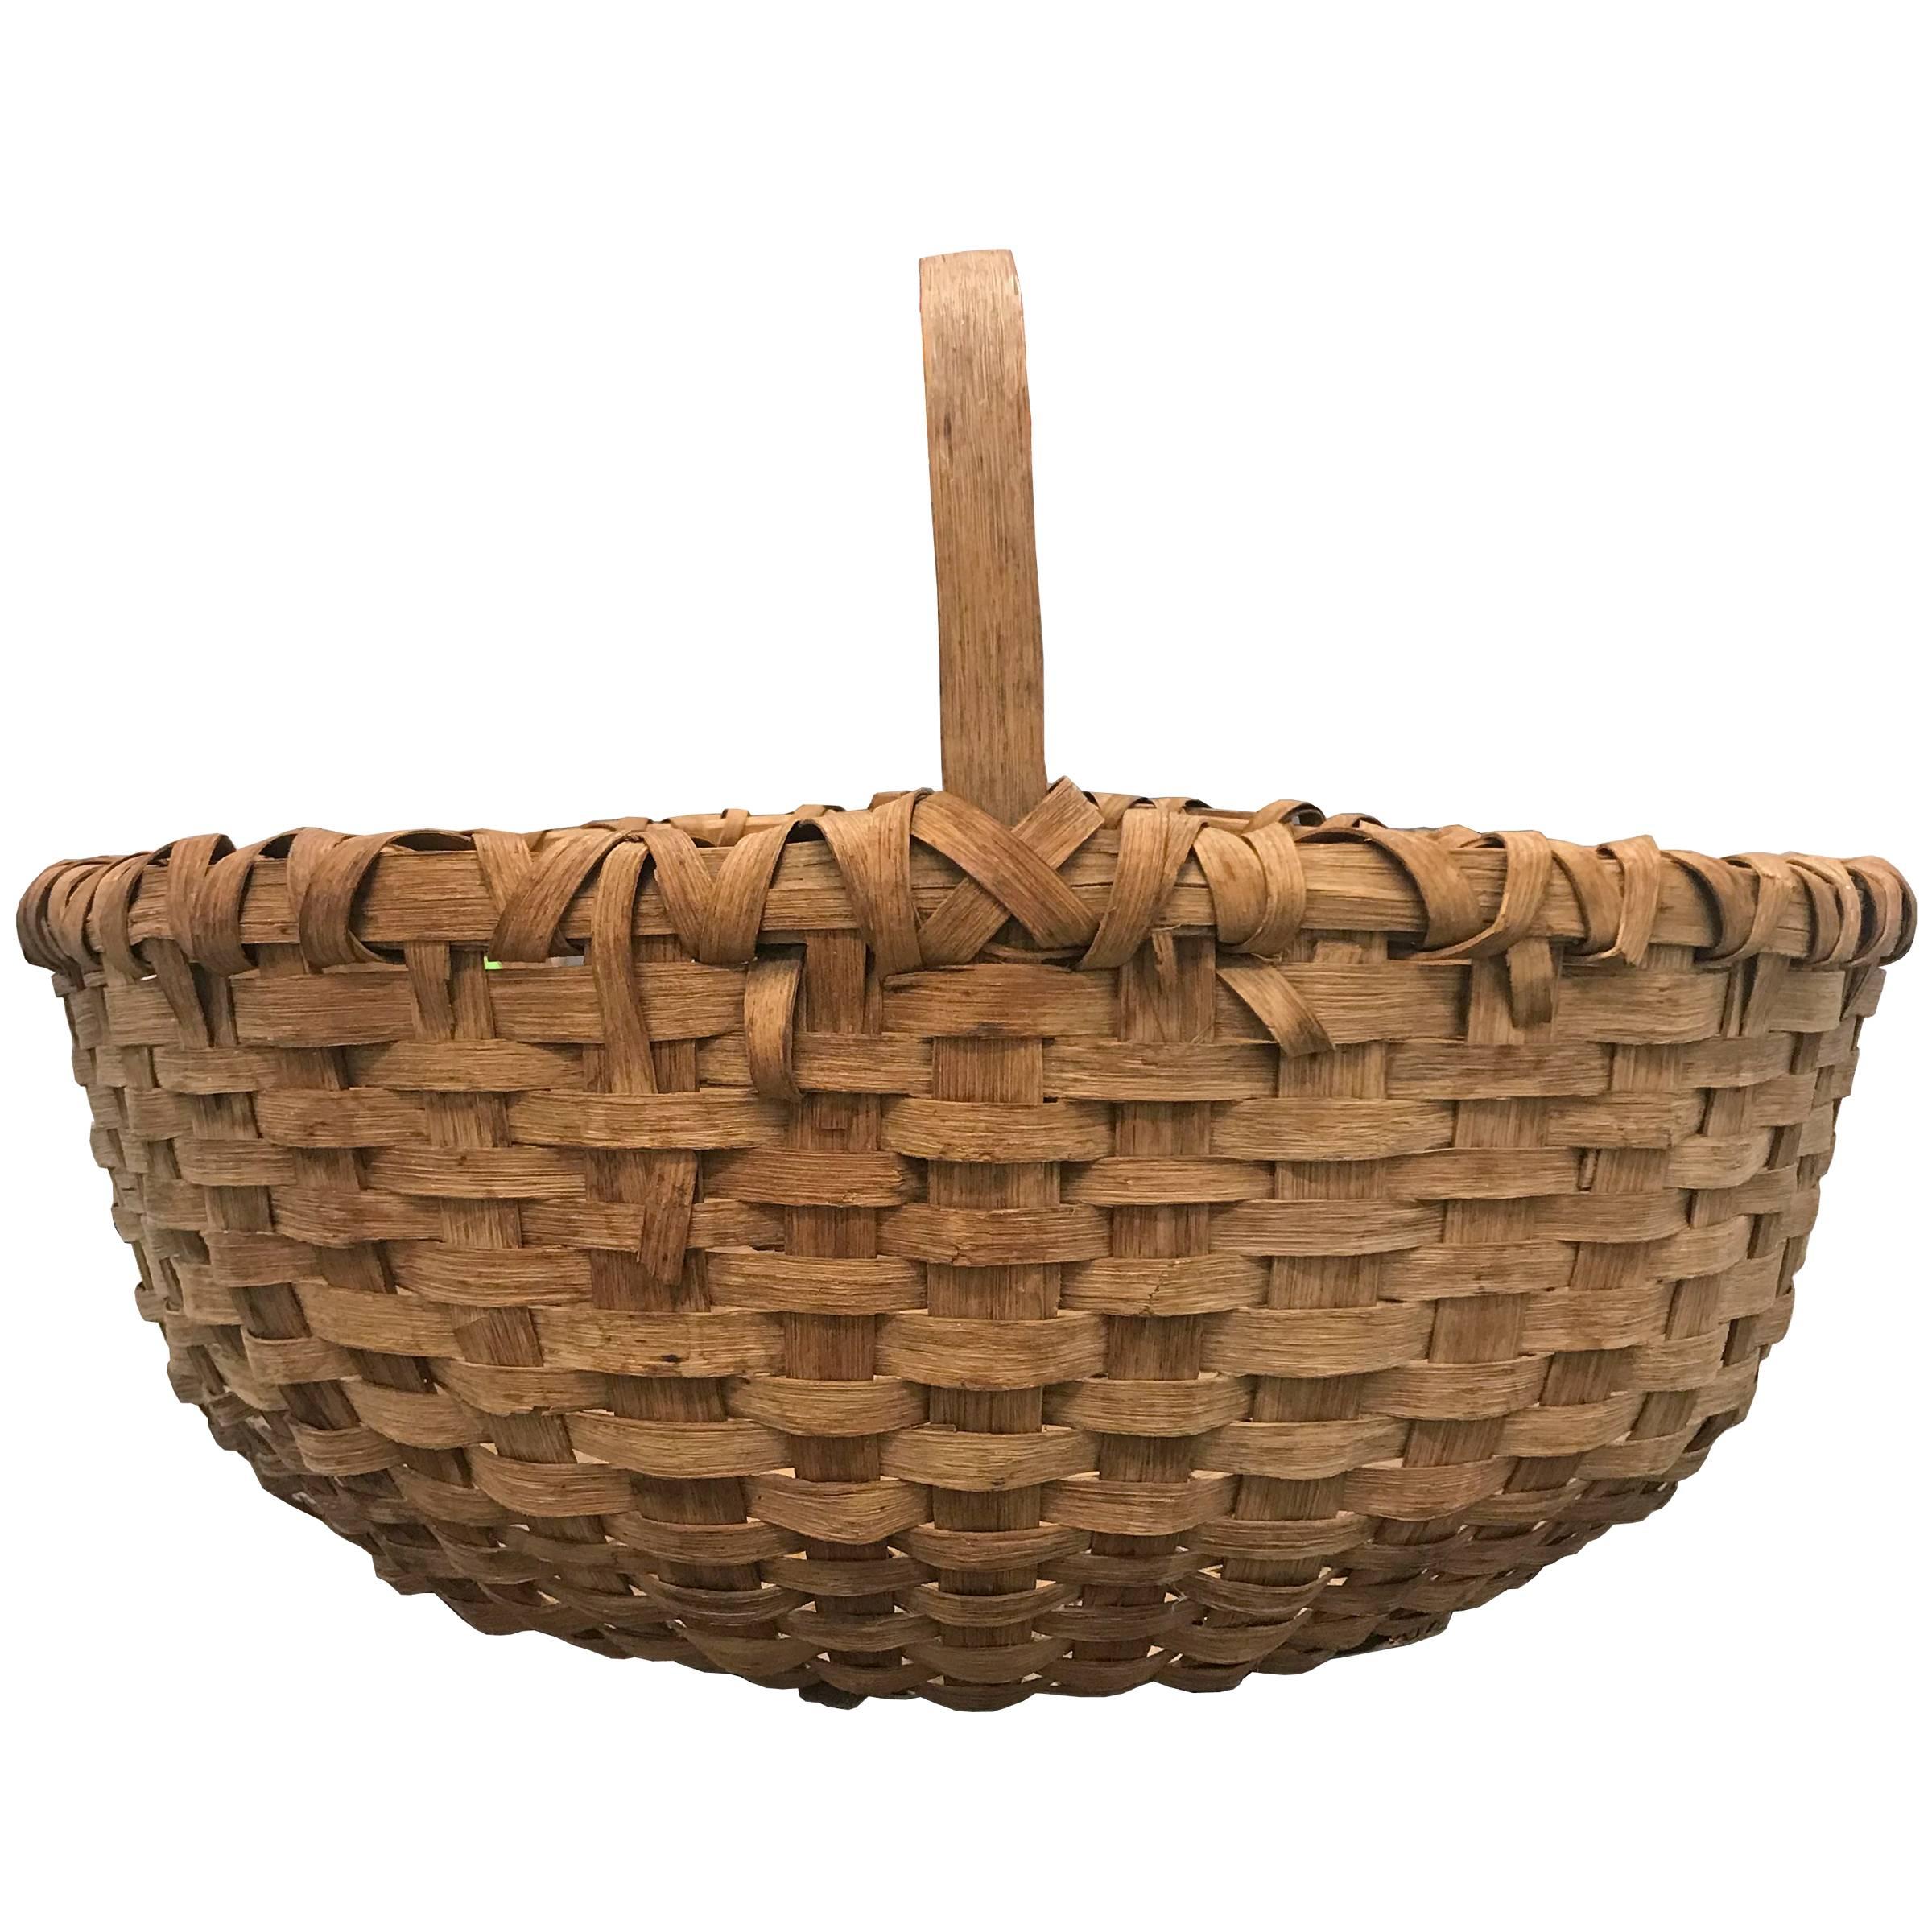 A large 19th century American splint oak gathering basket with one long bent-oak handle, a double banded rim, and a large belly. Found in New England.